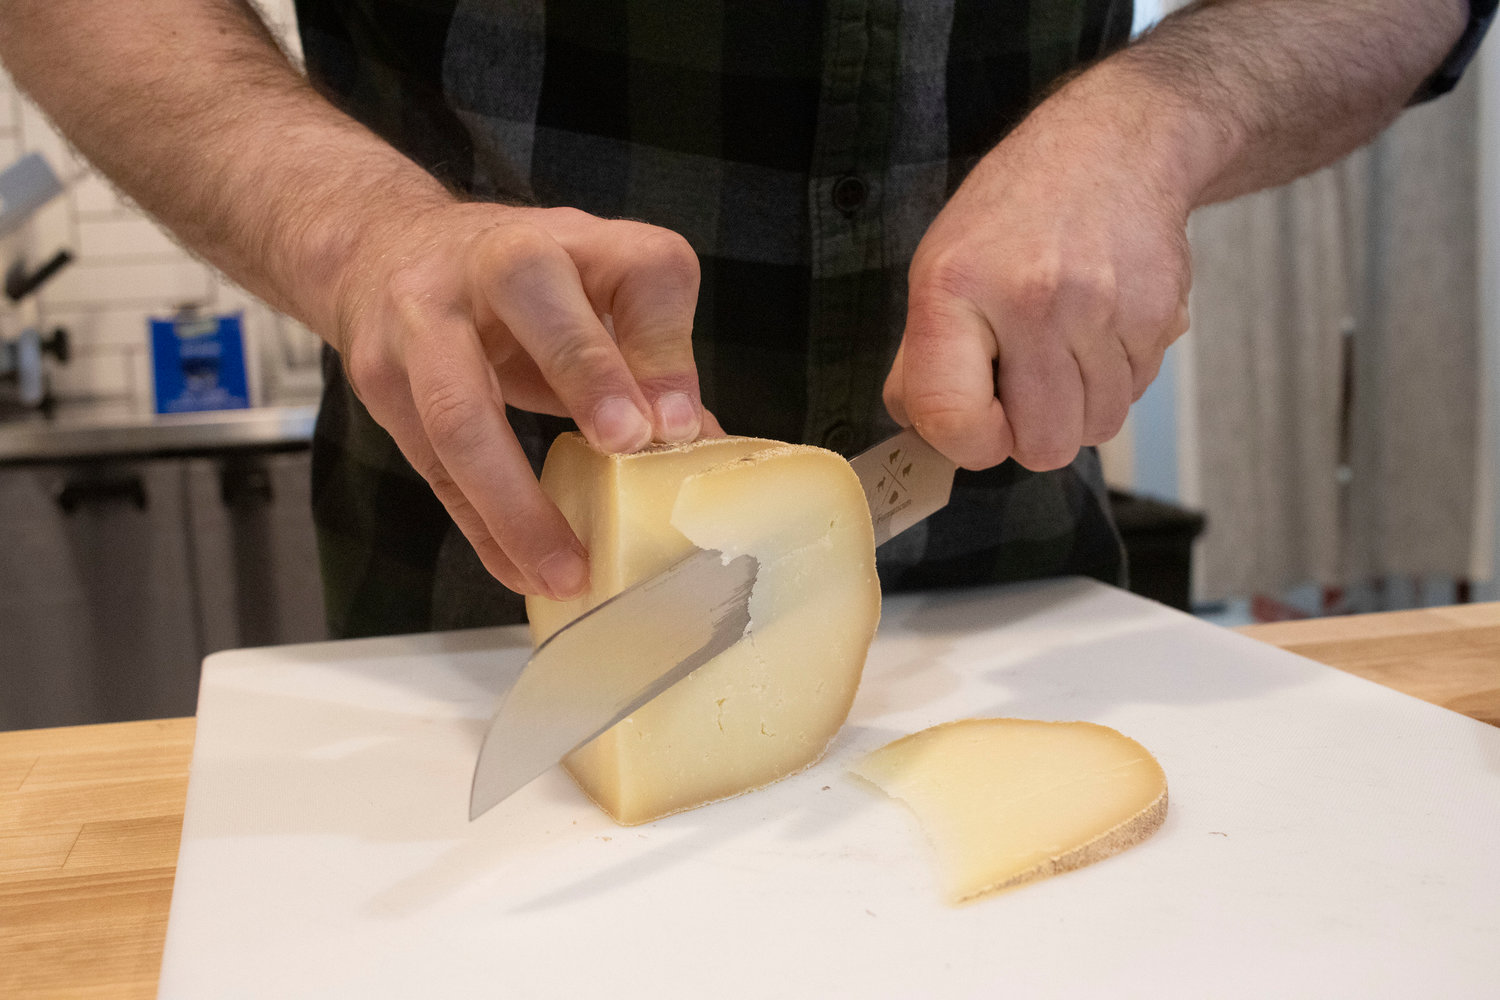 Rind owner Tim Fichera cuts into a block of Verona, a cheese made from sheep’s milk.